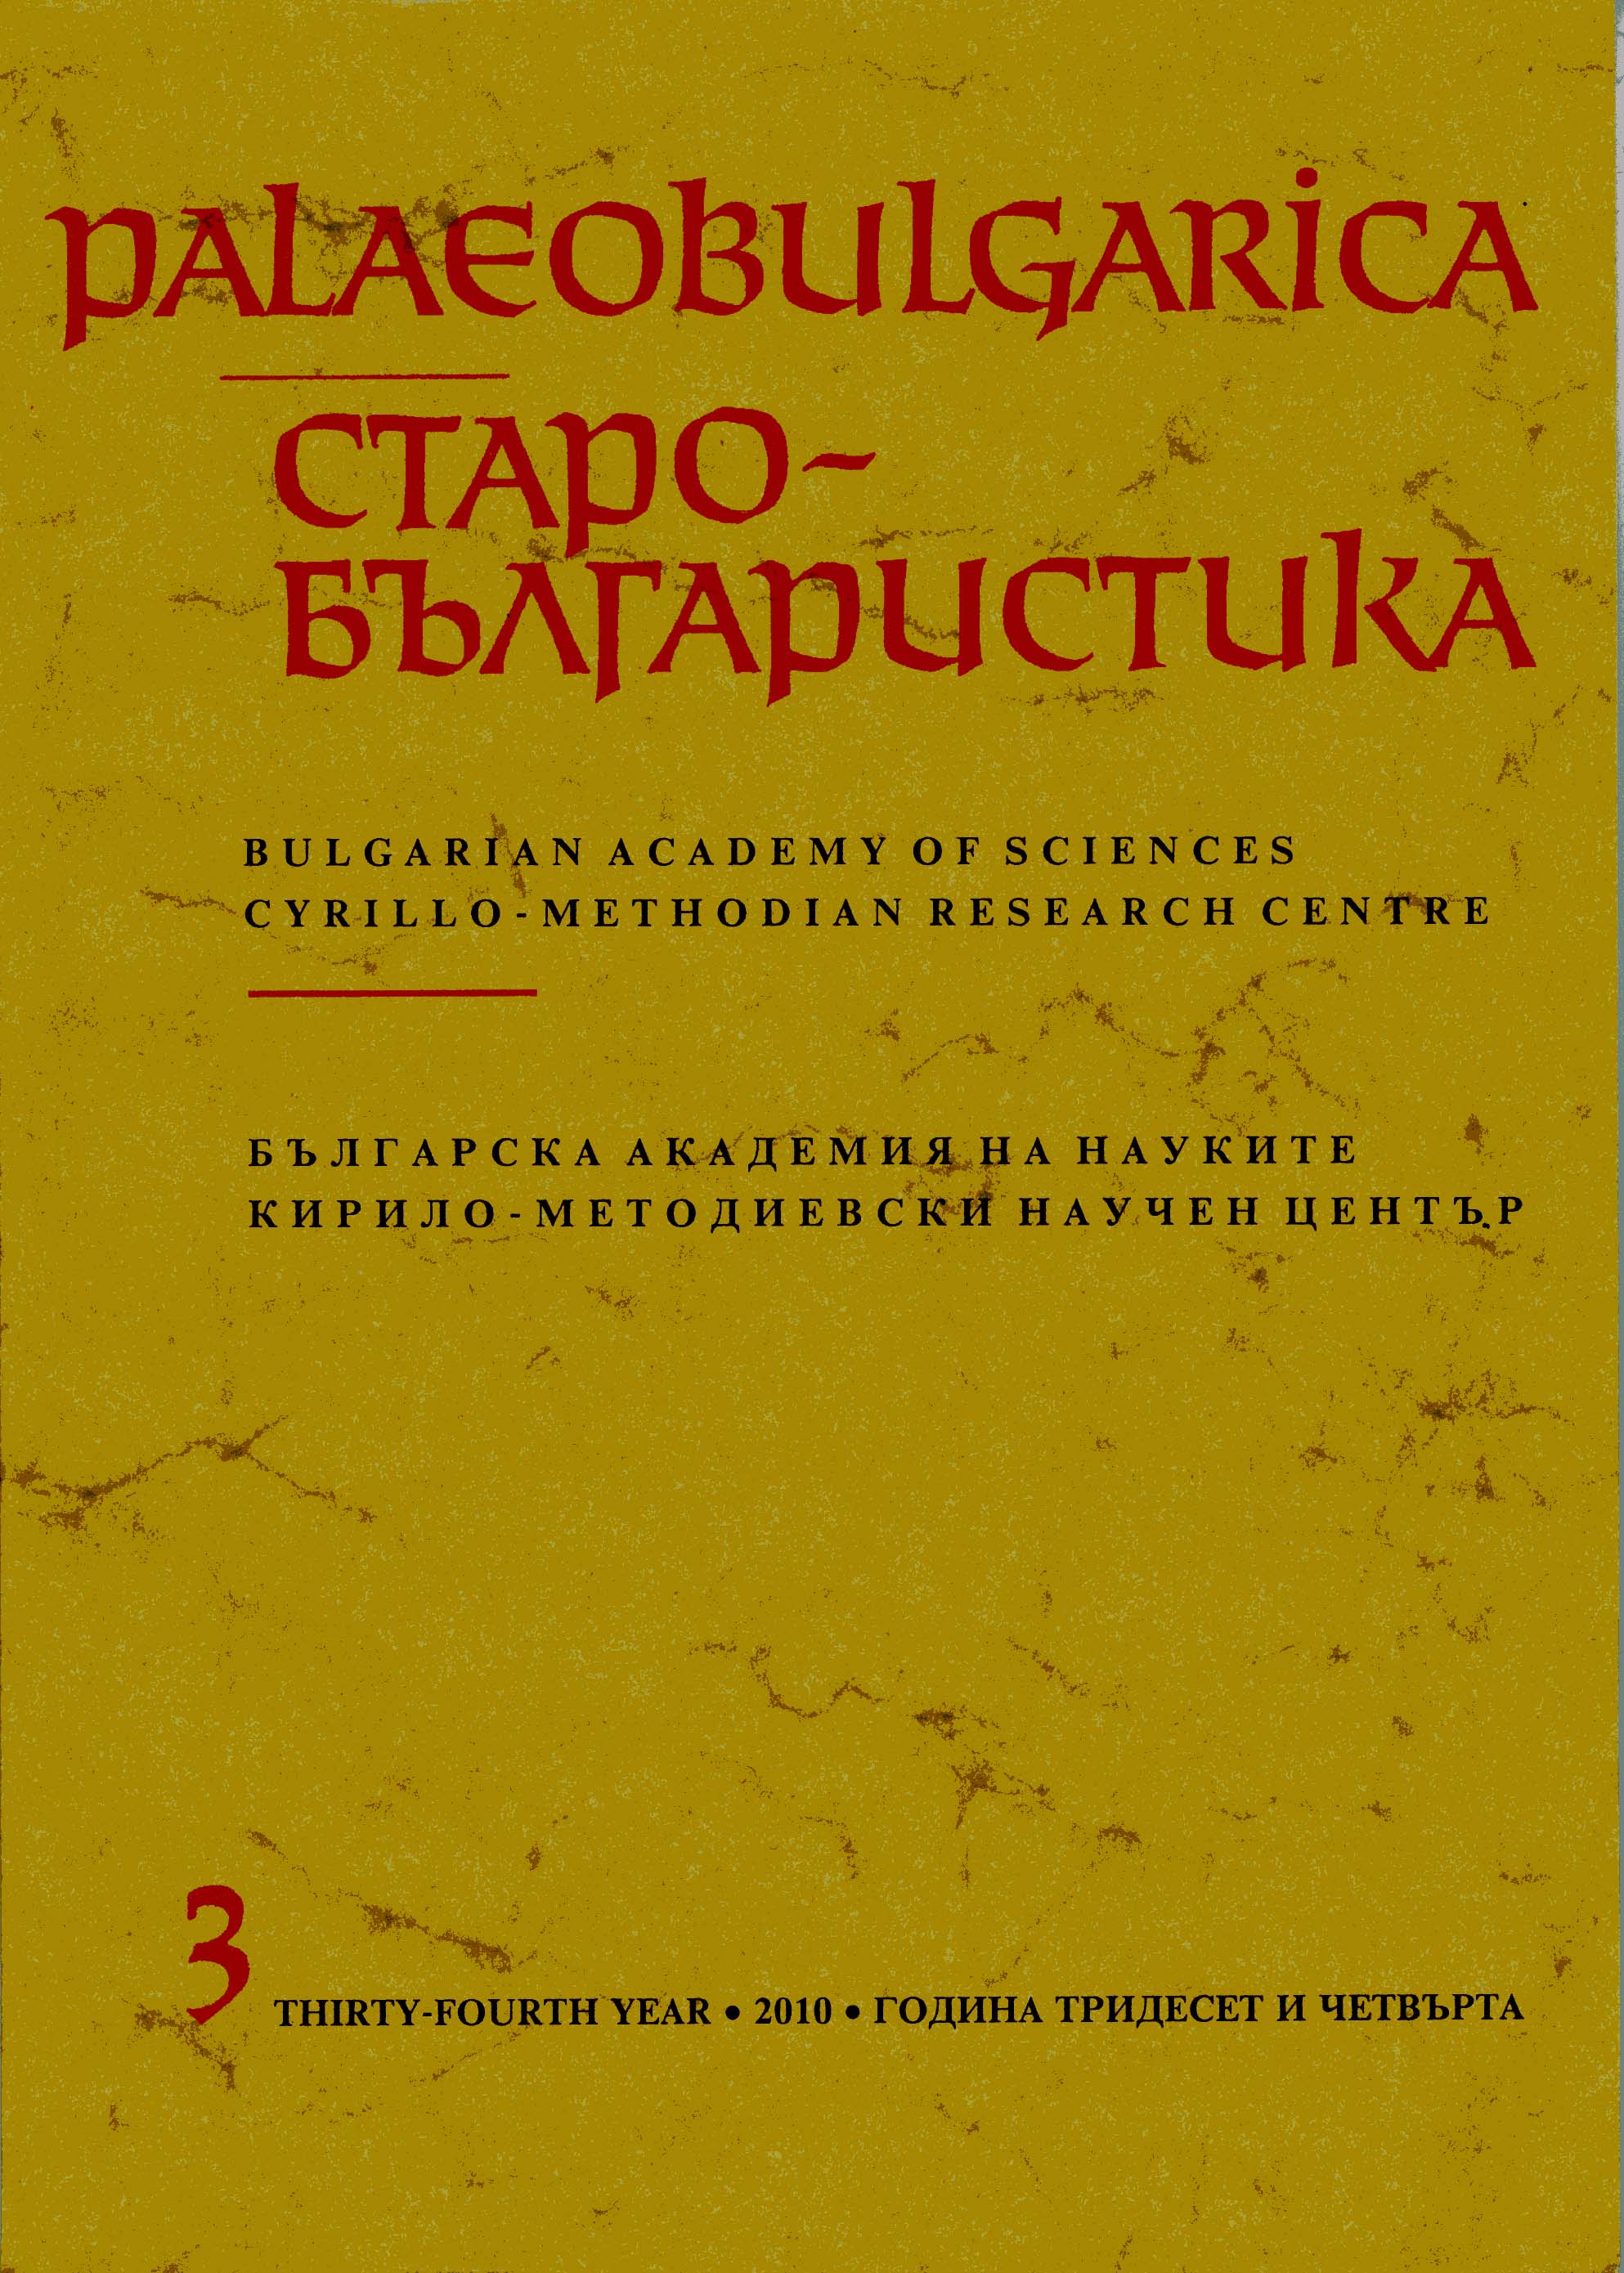 The Biblical Octateuch as Part of the Archival Chronograph Cover Image